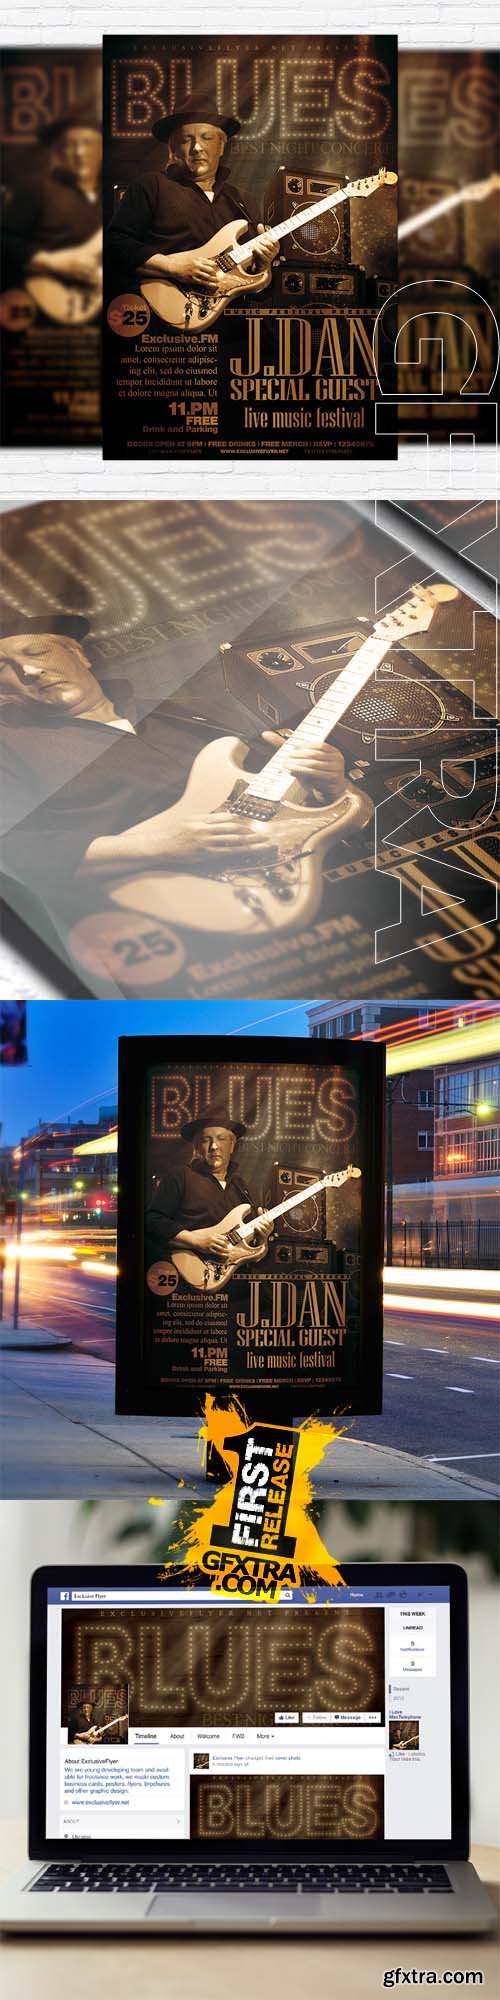 Blues - Flyer Template + Facebook Cover